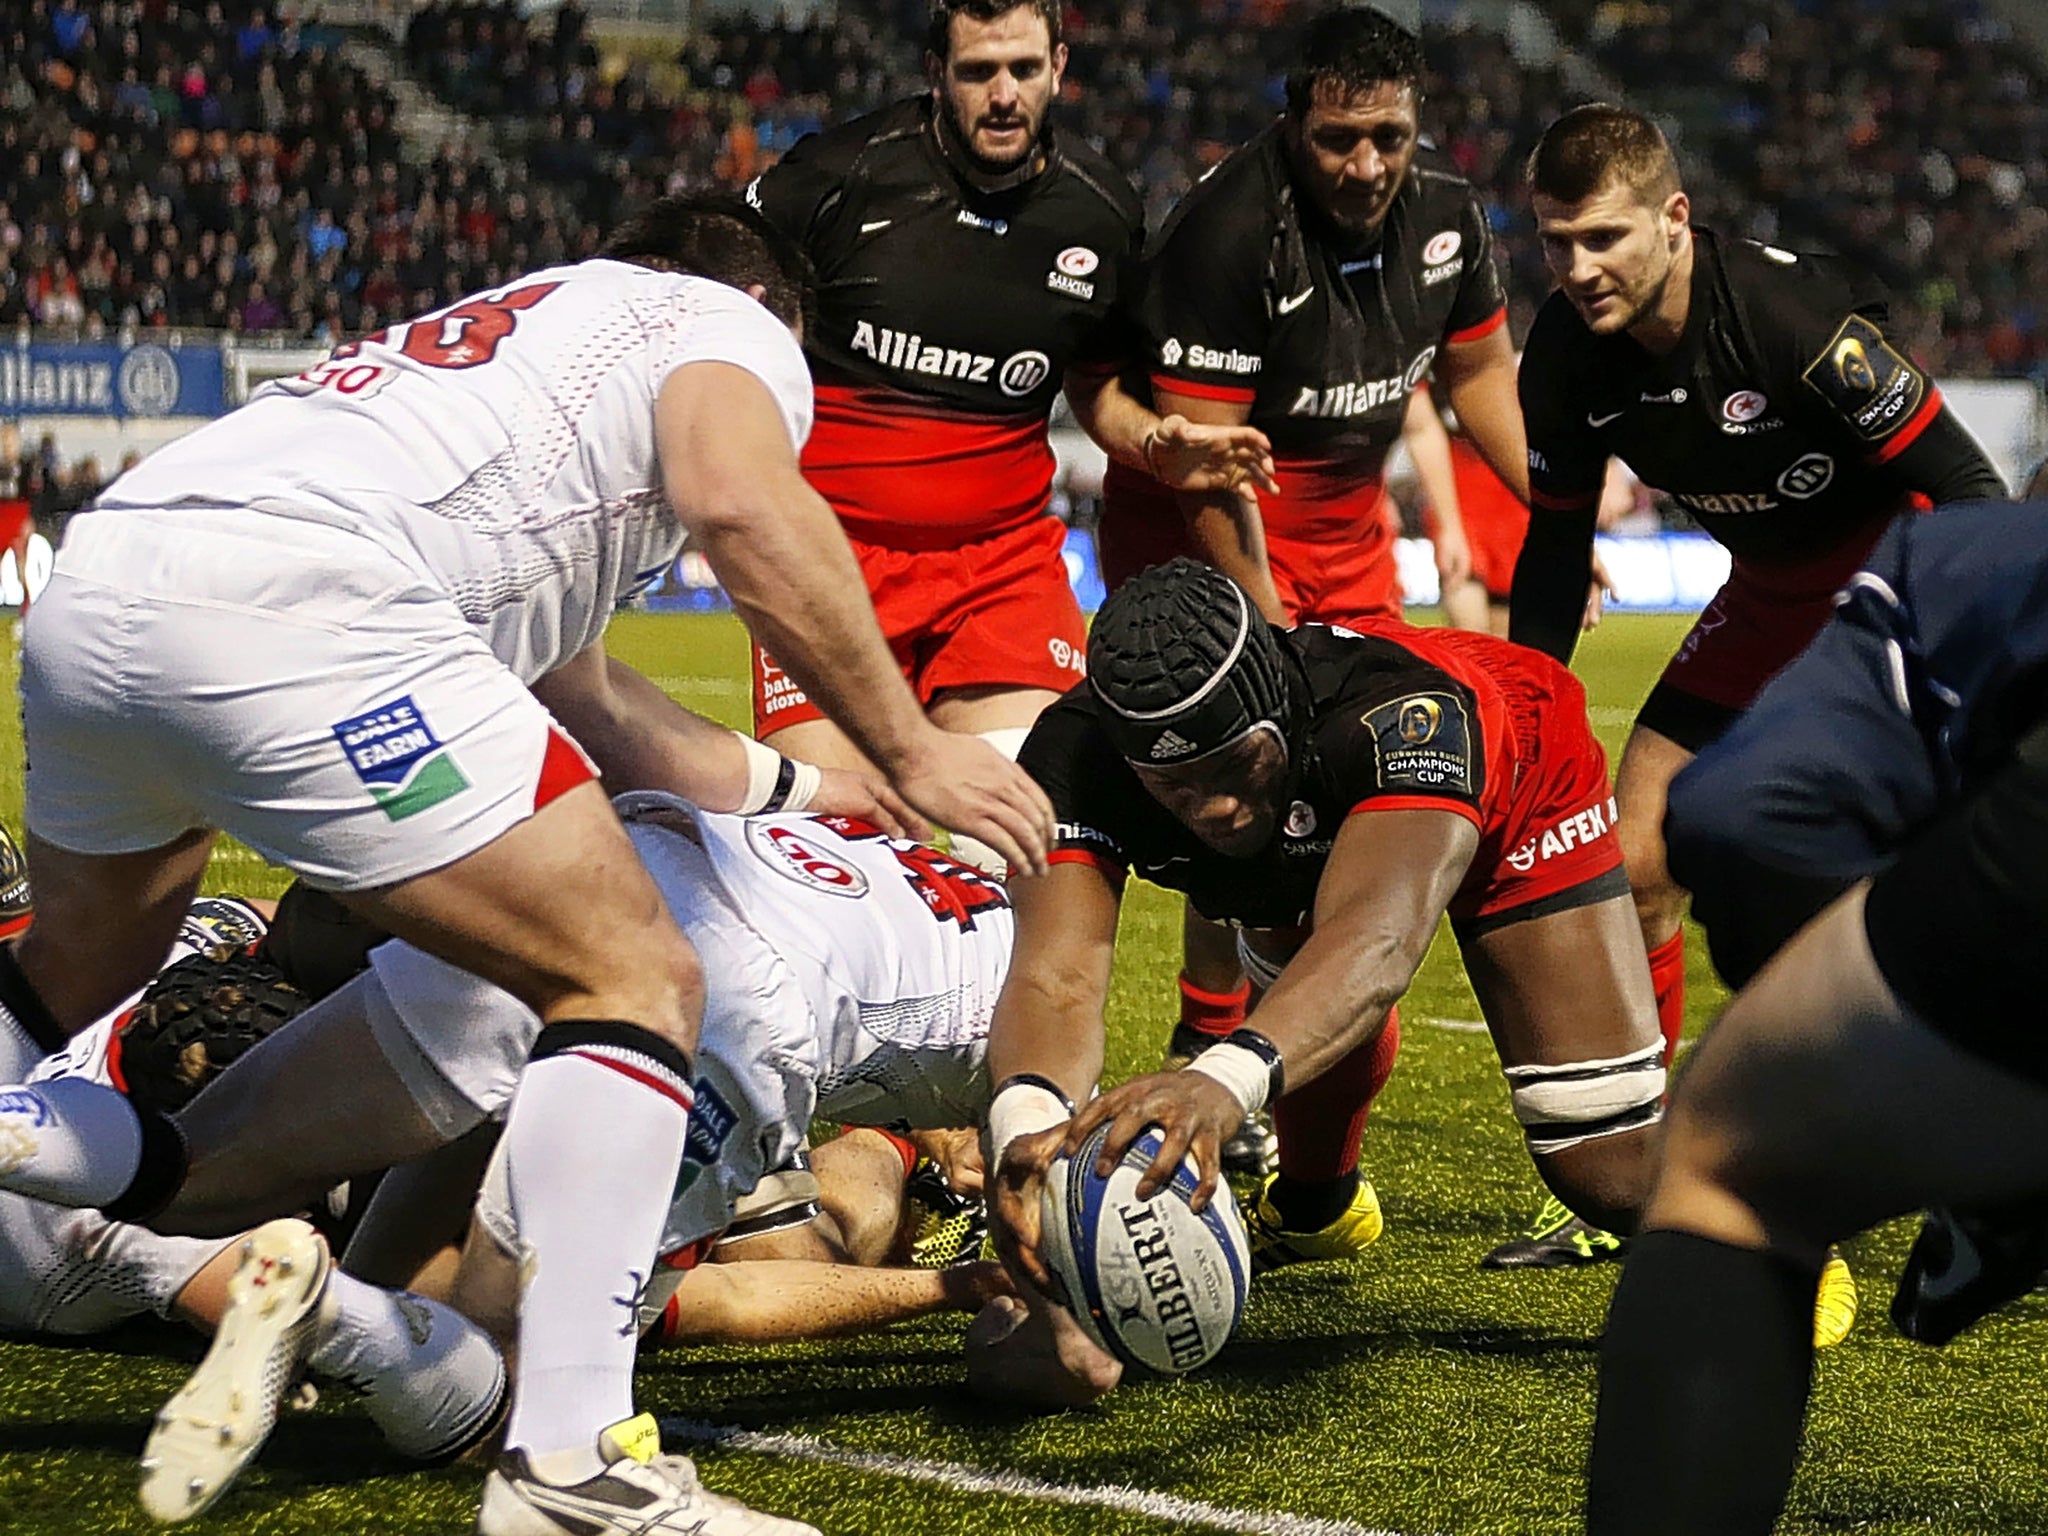 Maro Itoje scores to help Saracens clinch a home Champions Cup quarter-final